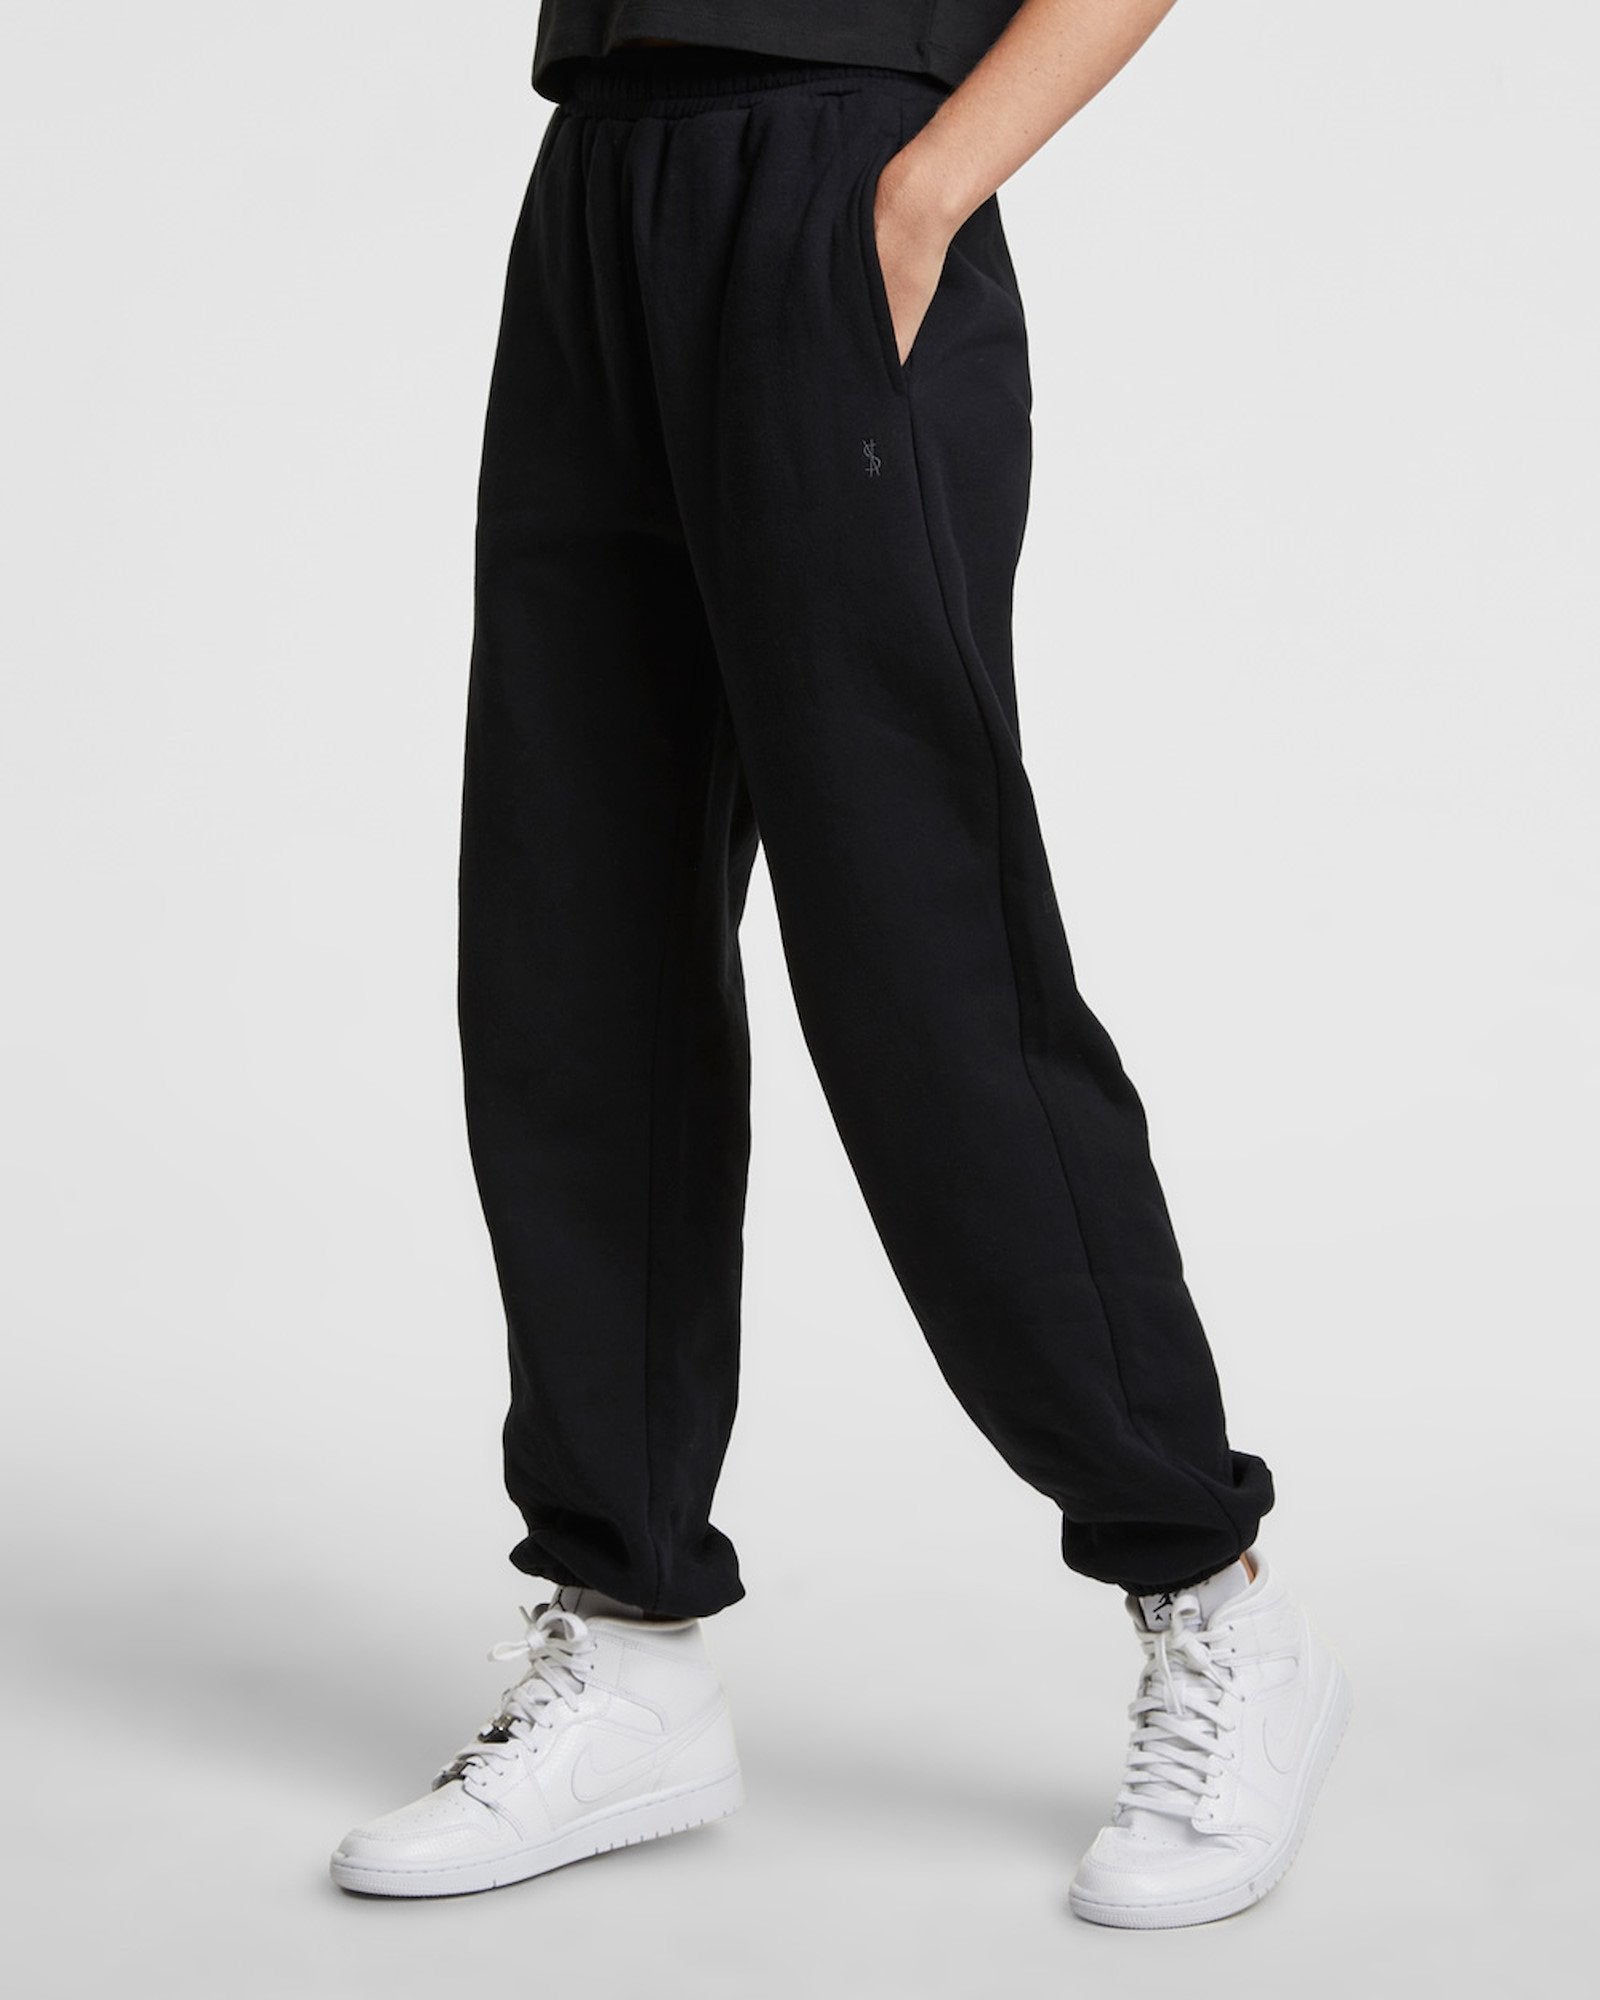 Nike Libero 14 3/4 Knit Pant BLACK : Amazon.in: Clothing & Accessories